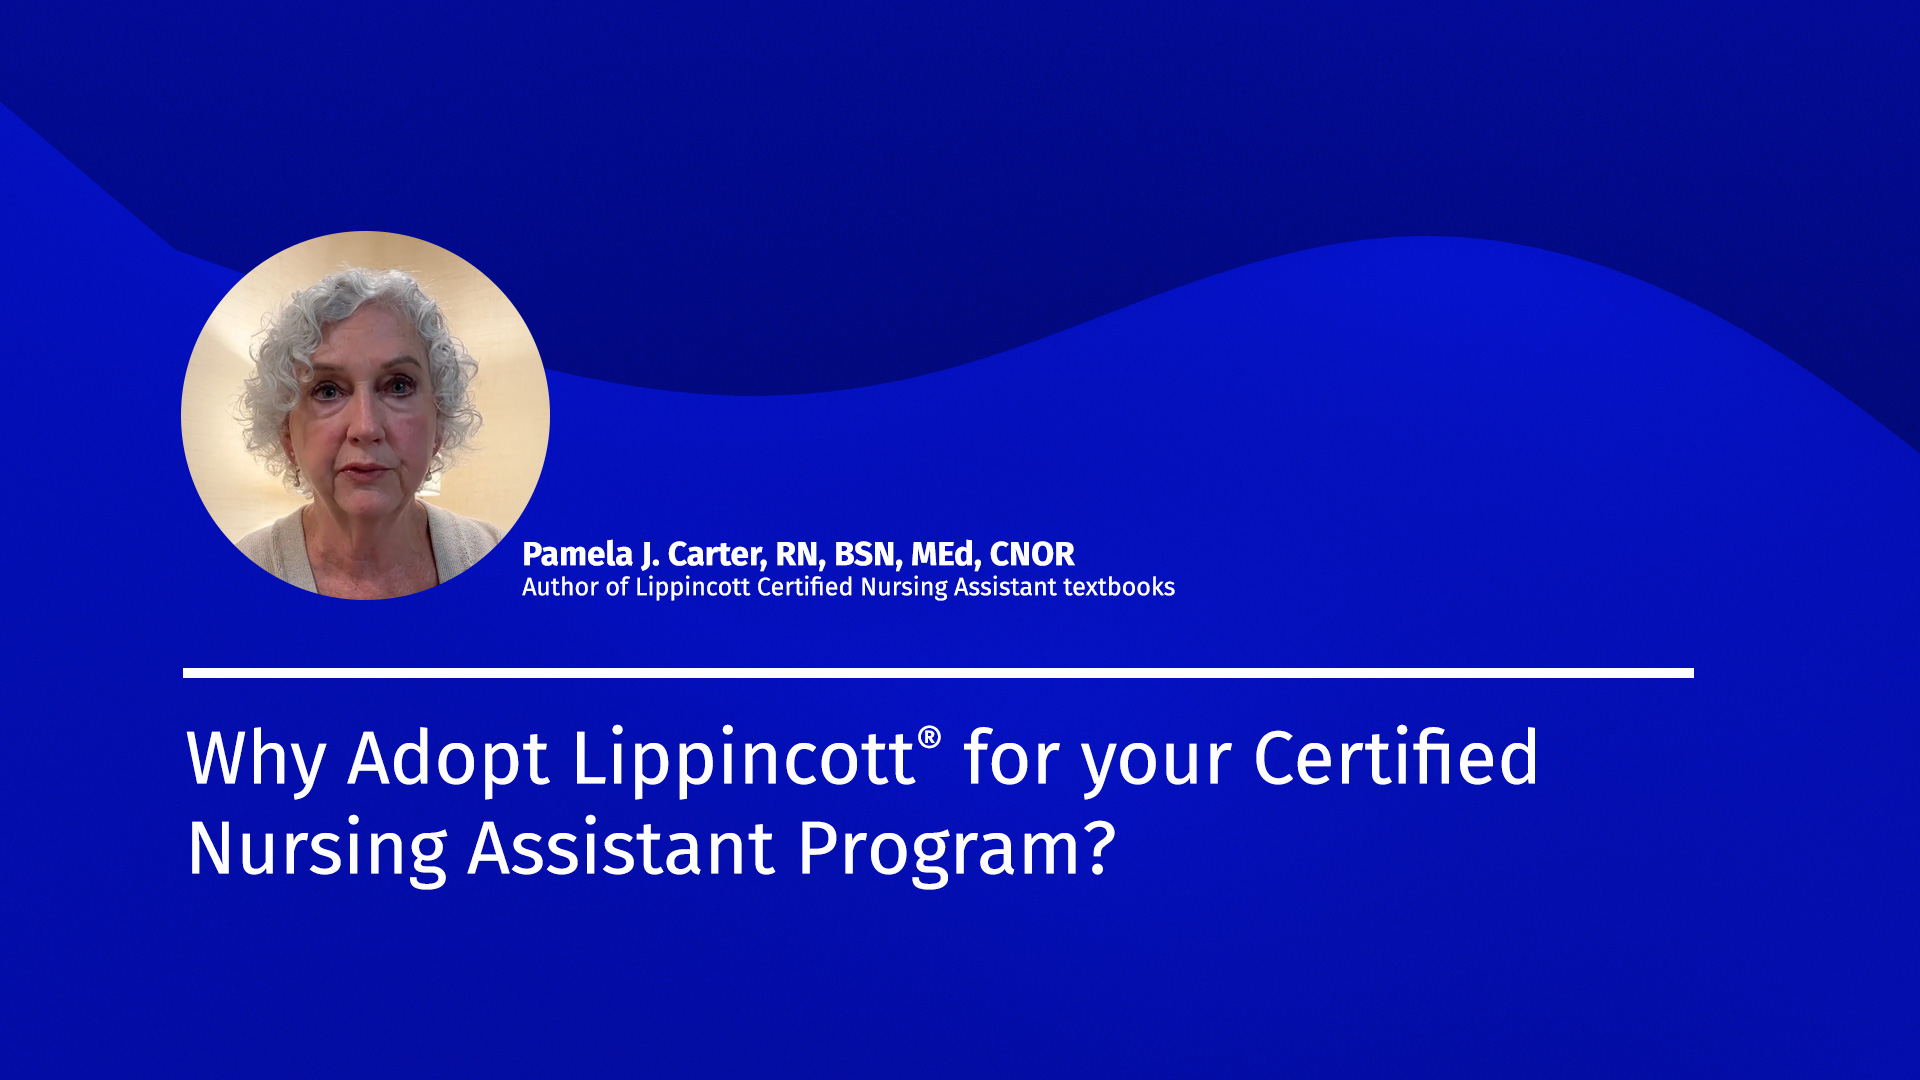 Pam Carter explains why you should adopt Lippincott ® for your Certified Nursing Assistant Program